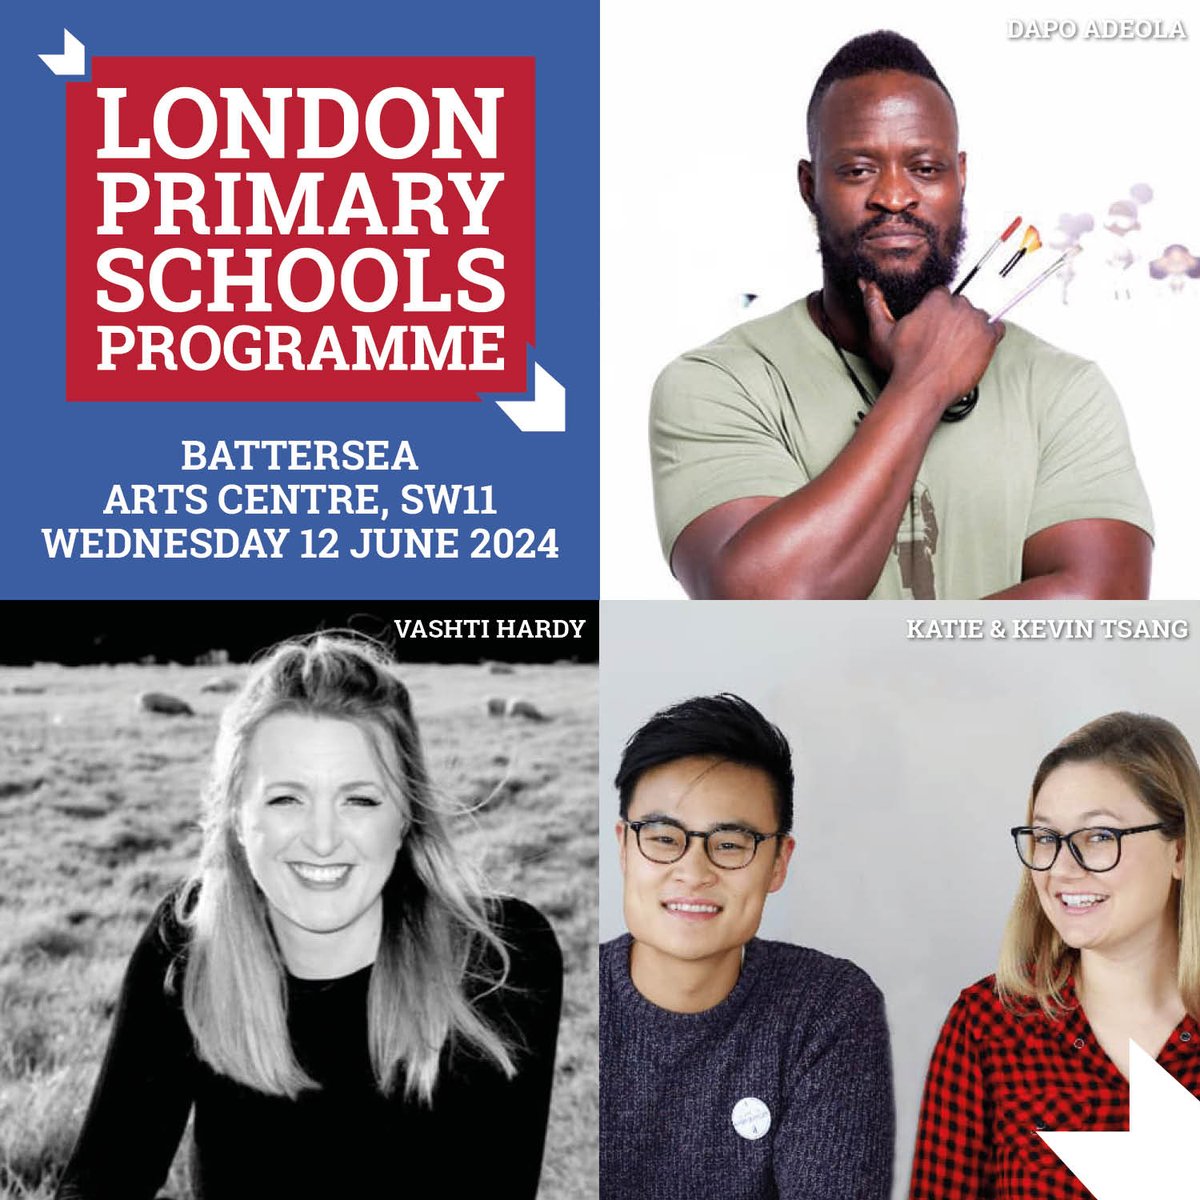 #TEACHERS OF #WANDSWORTH! We're bringing our FREE Primary Schools Programme to @battersea_arts @wandbc for the first time on Wednesday 12 June with @kwebberwrites & @kevtsang @vashti_hardy AND @dapsdraws. Make sure your class doesn't miss out! Book here barneskidslitfest.org/schools/